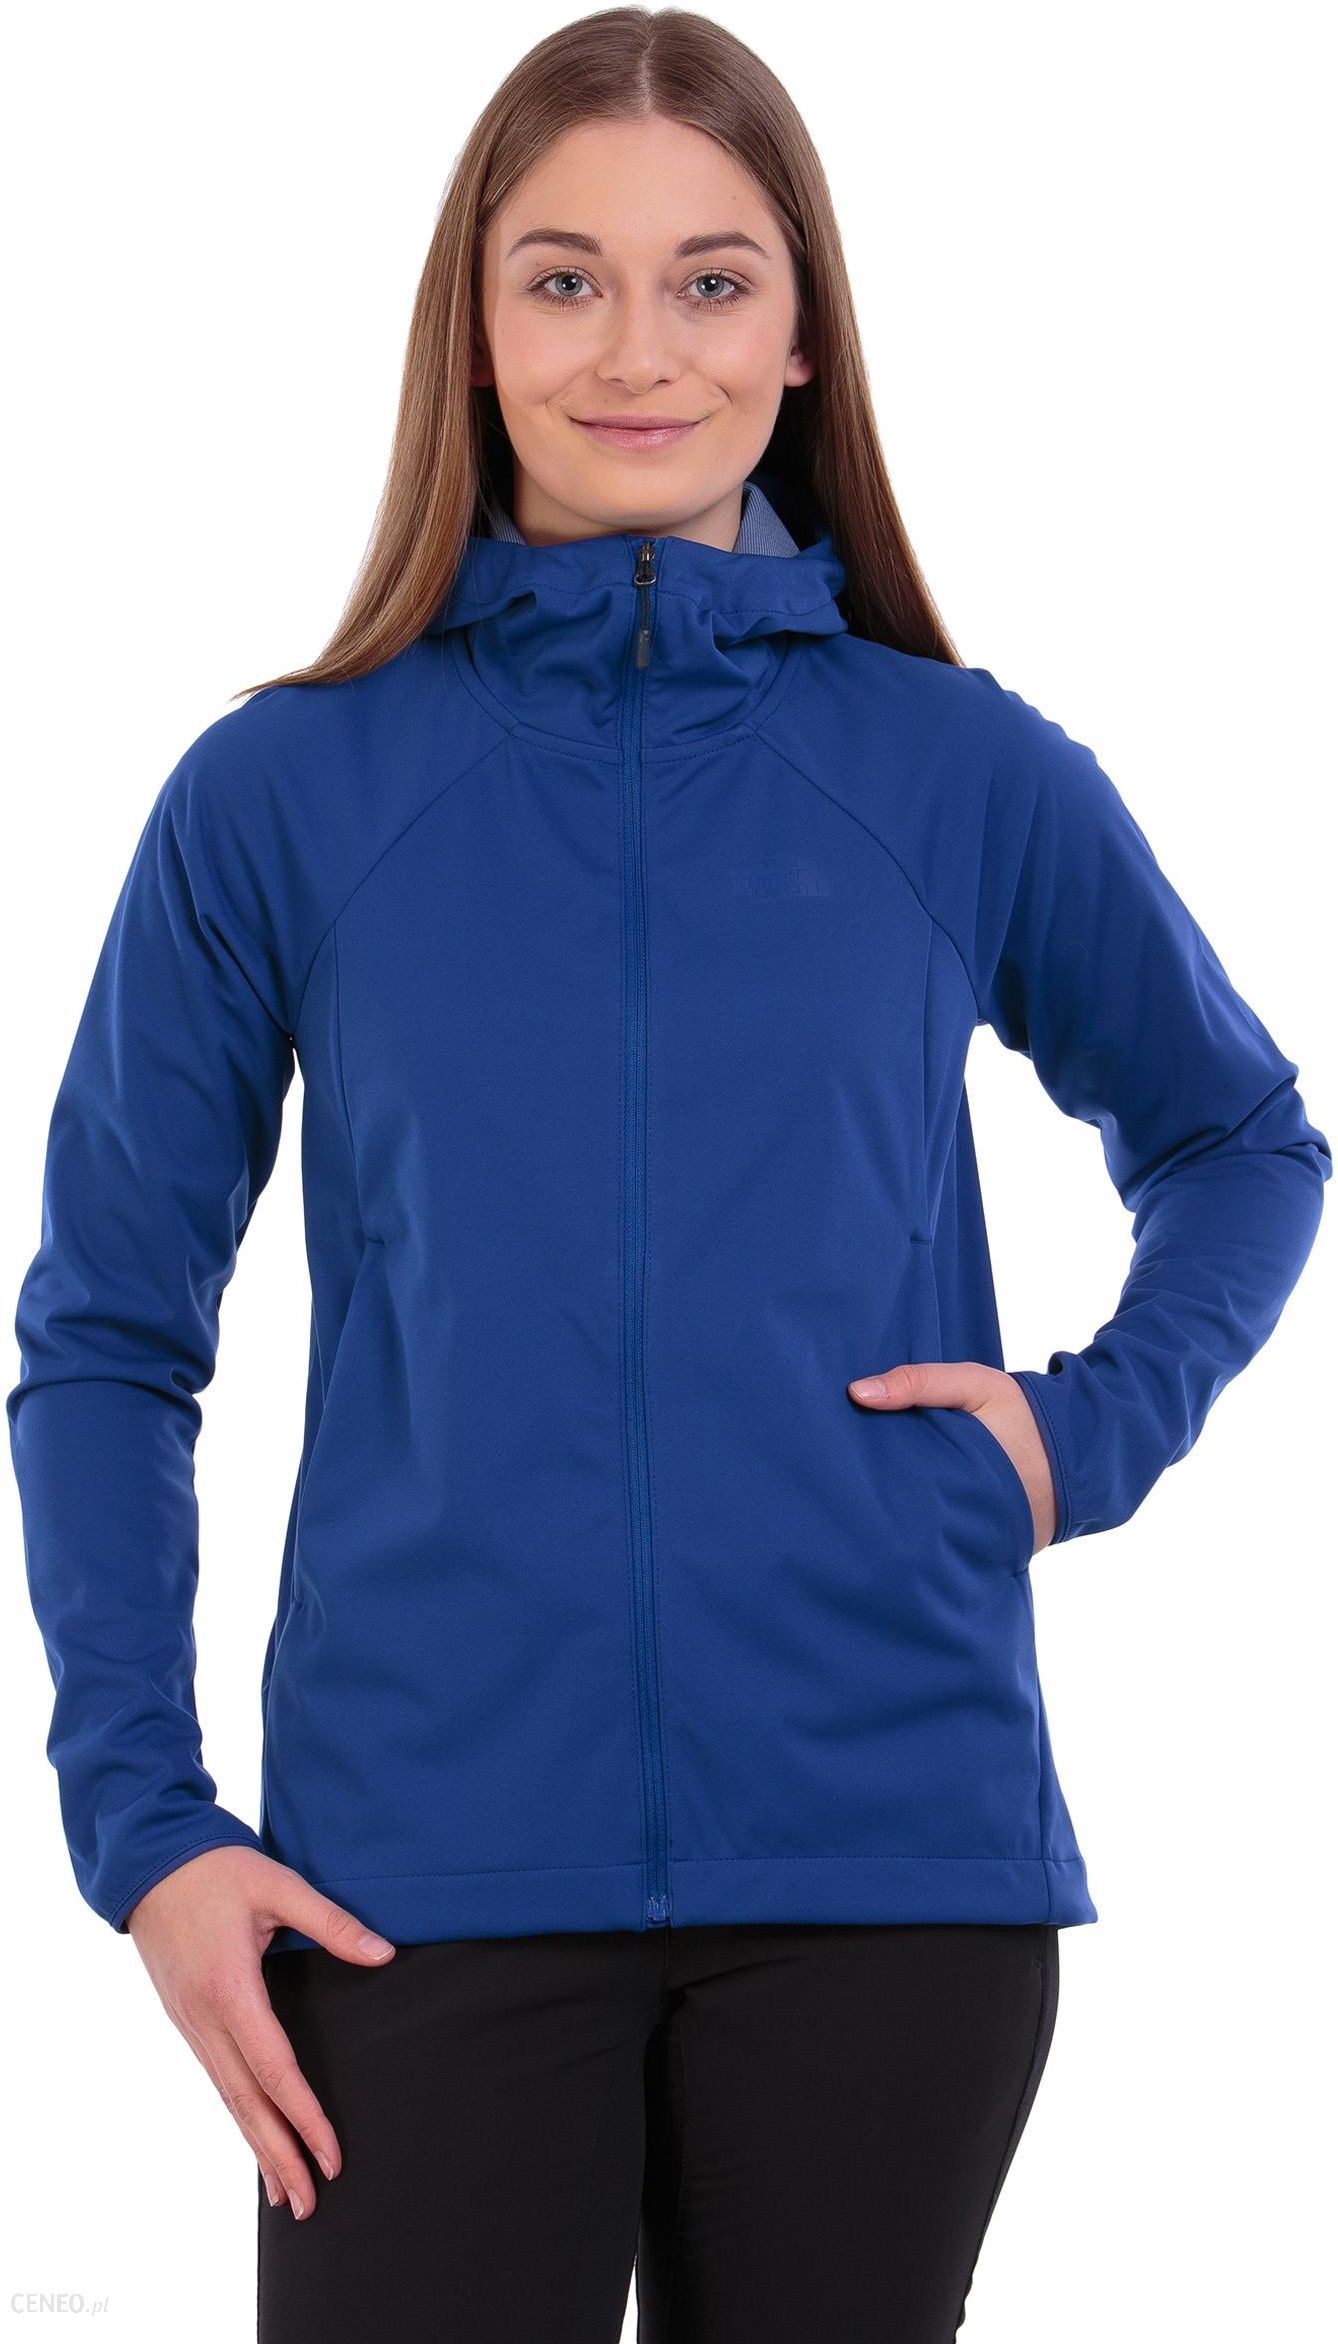 the north face inlux softshell